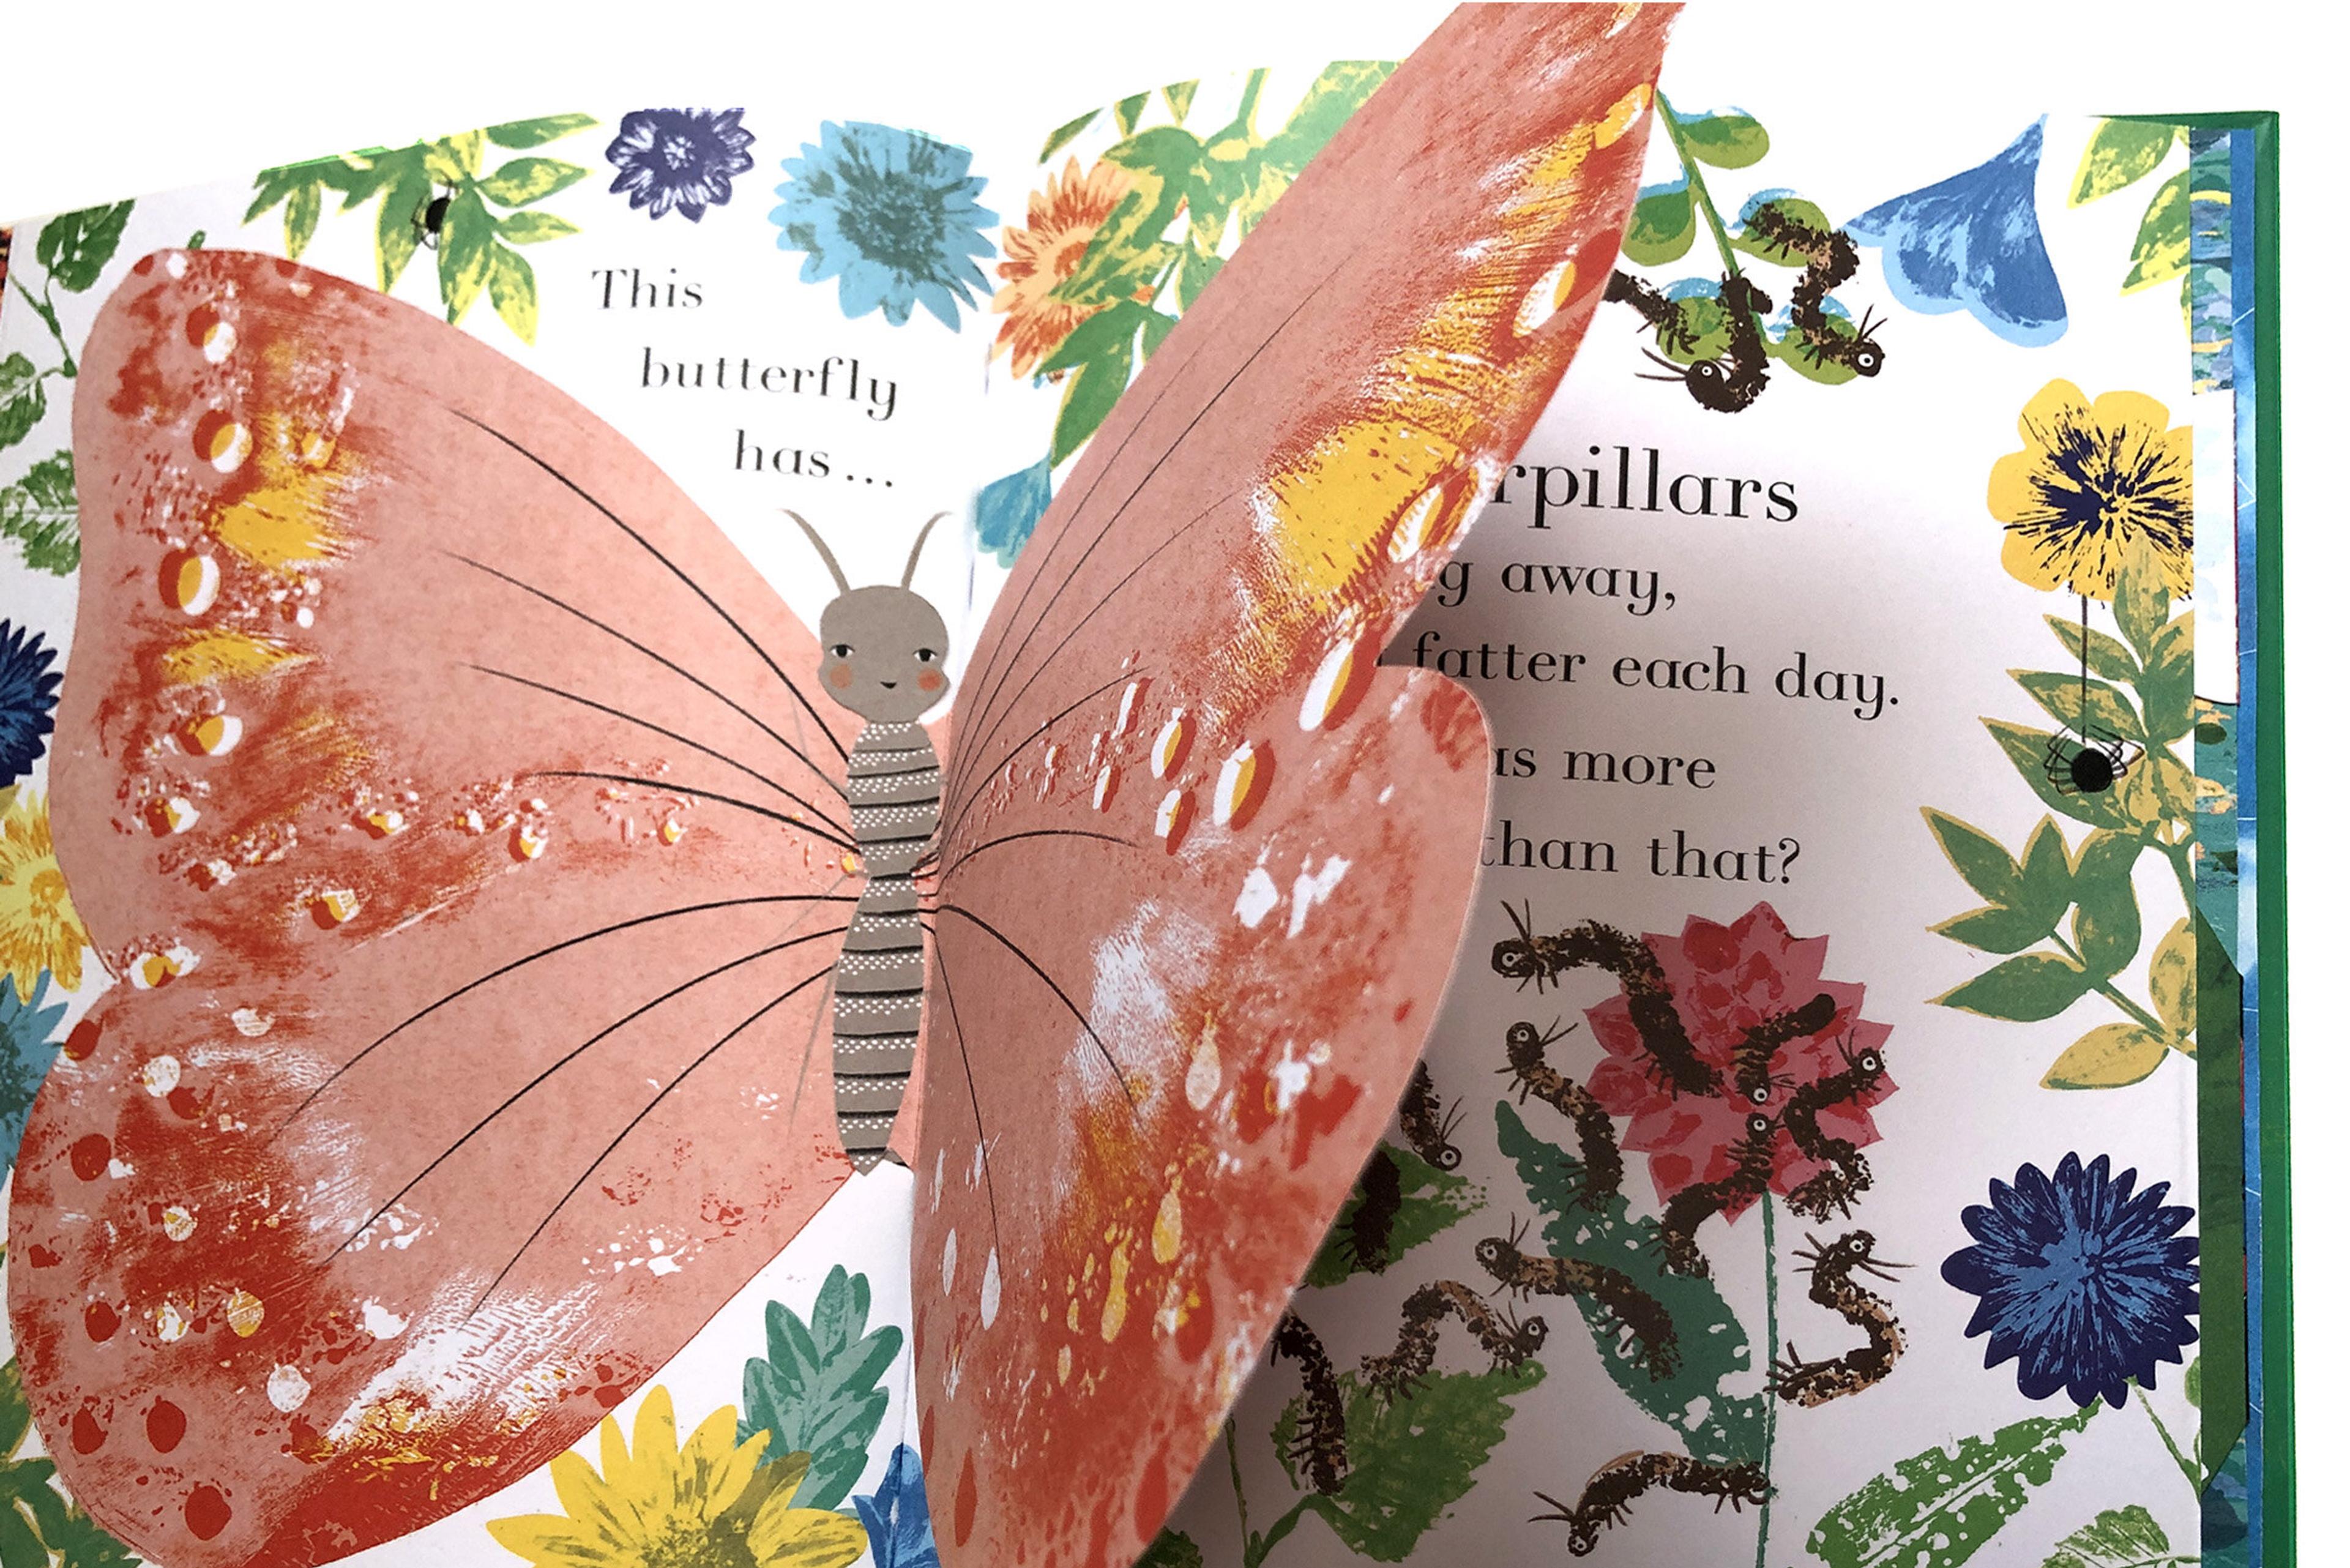 Photograph of a pop-up butterfly from picture book